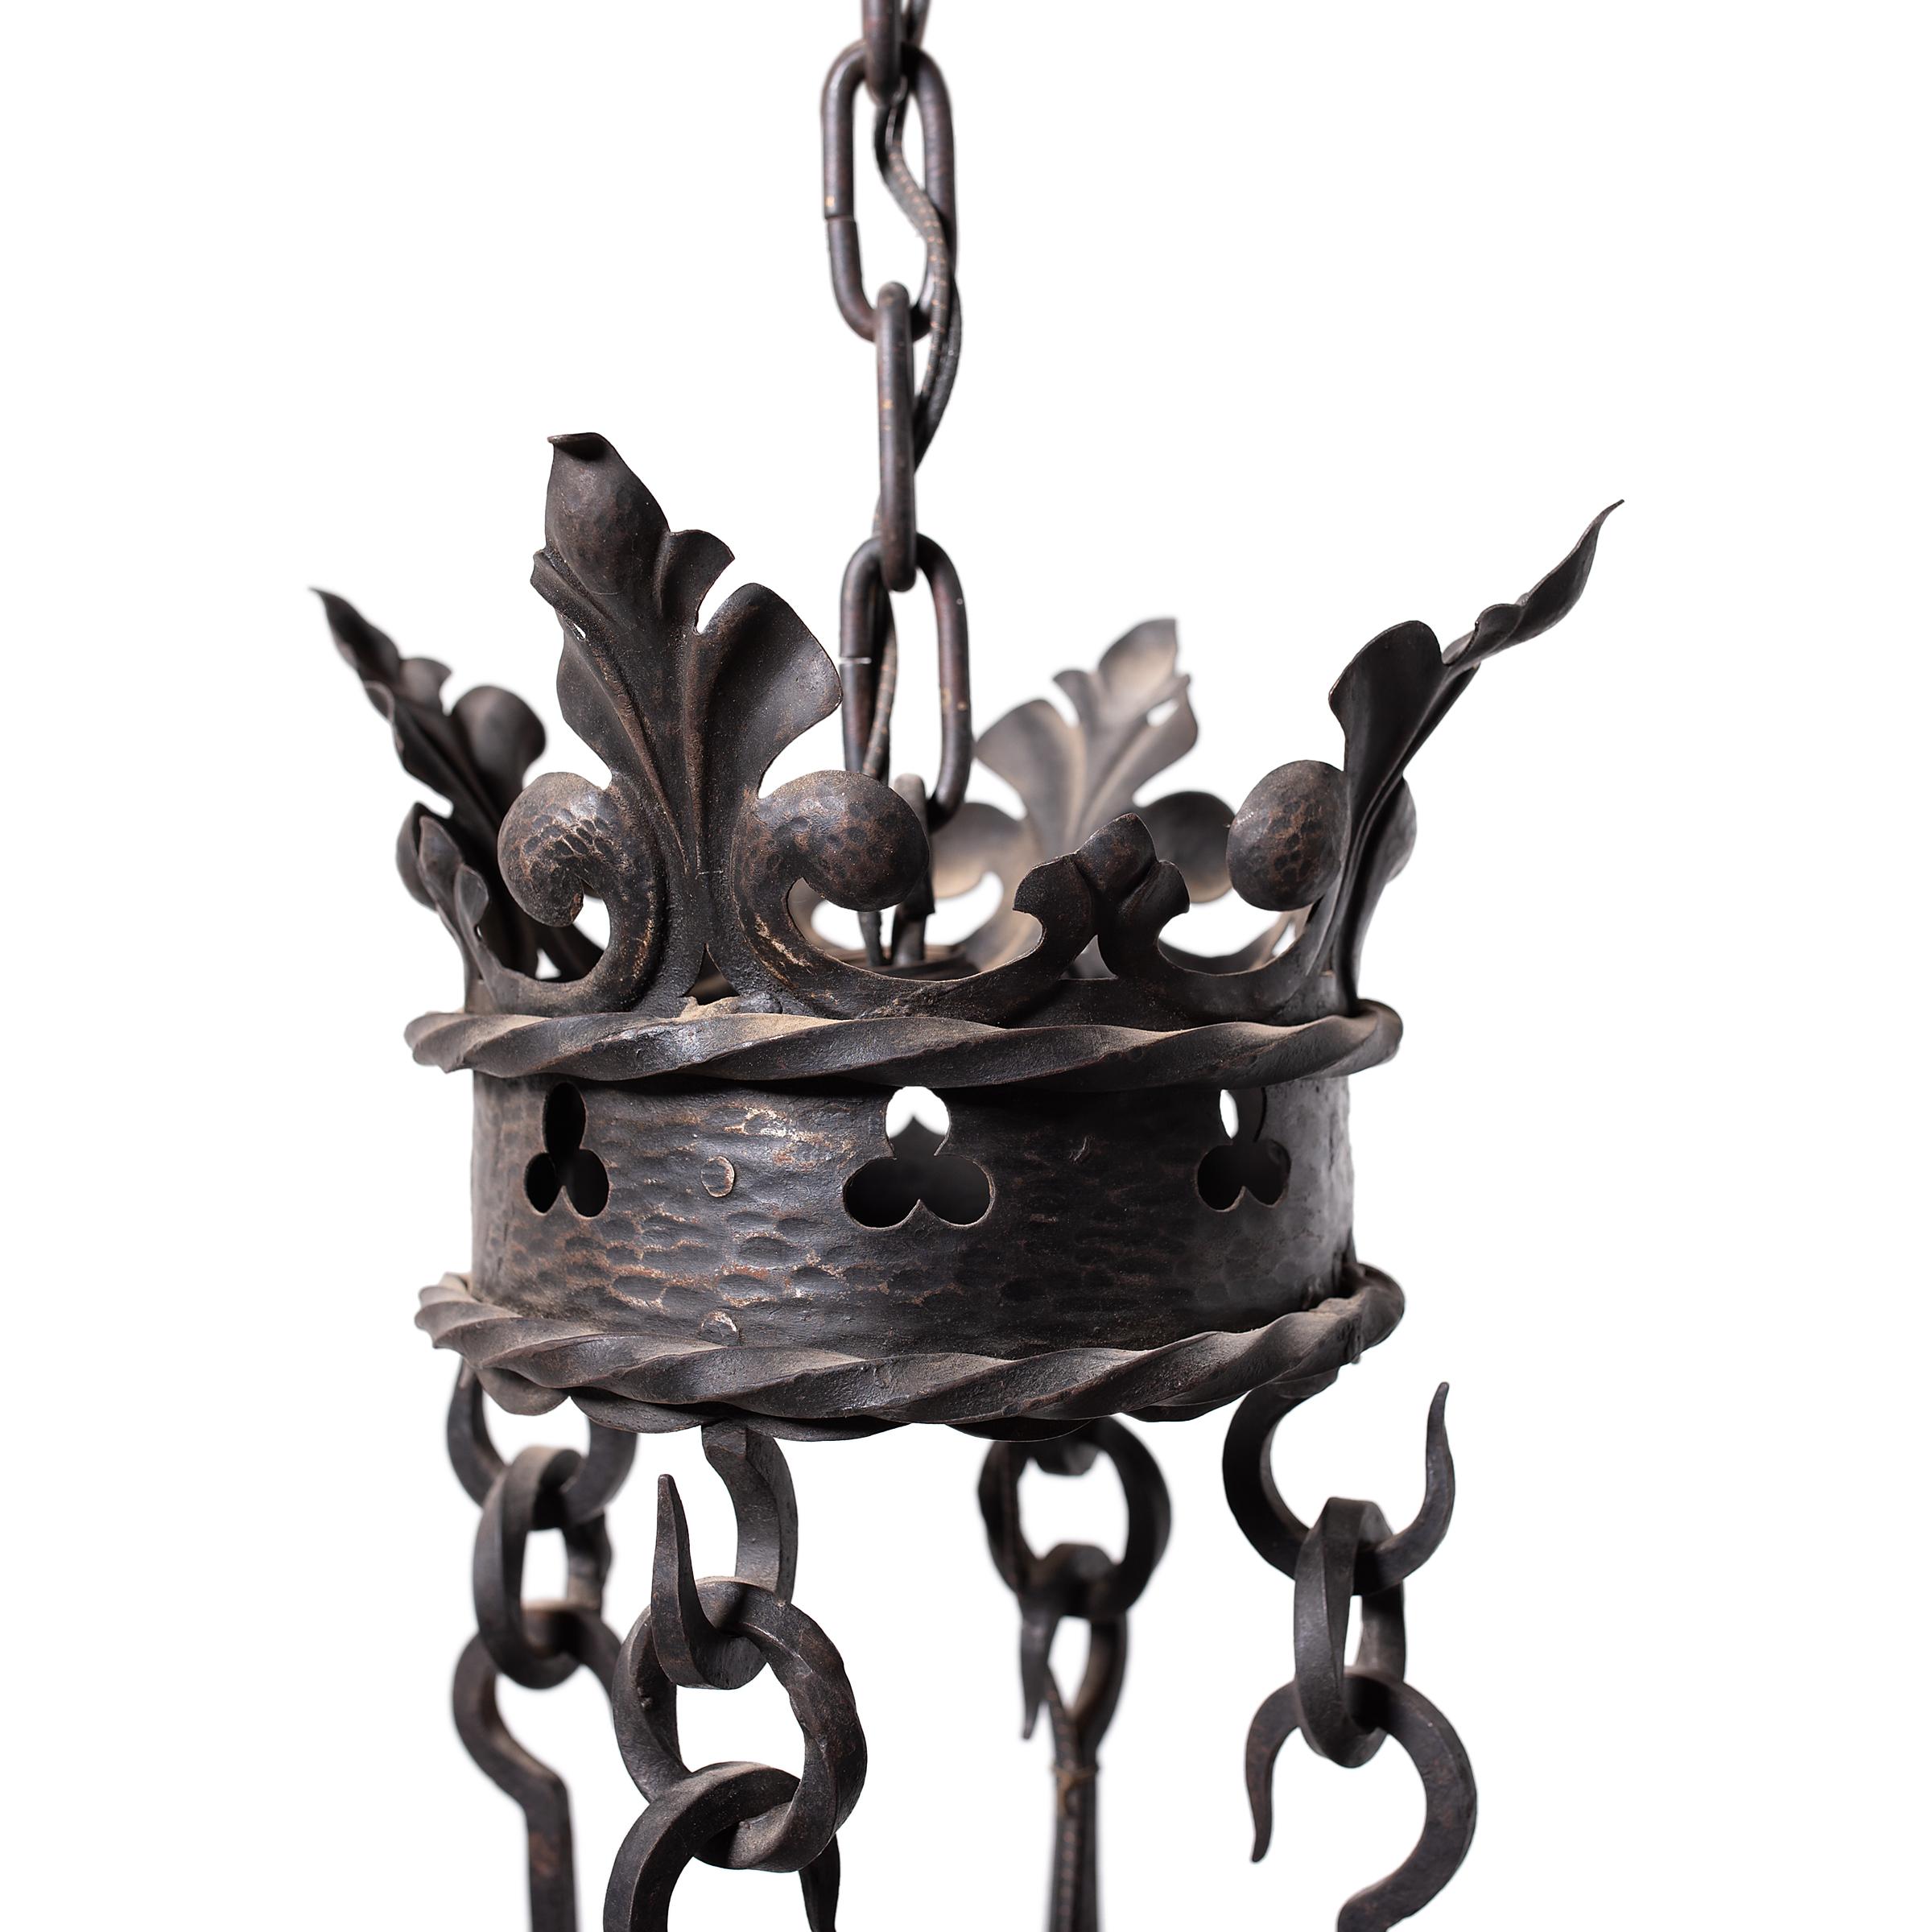 French Gothic Wrought Iron Chandelier, c. 1930 For Sale 2